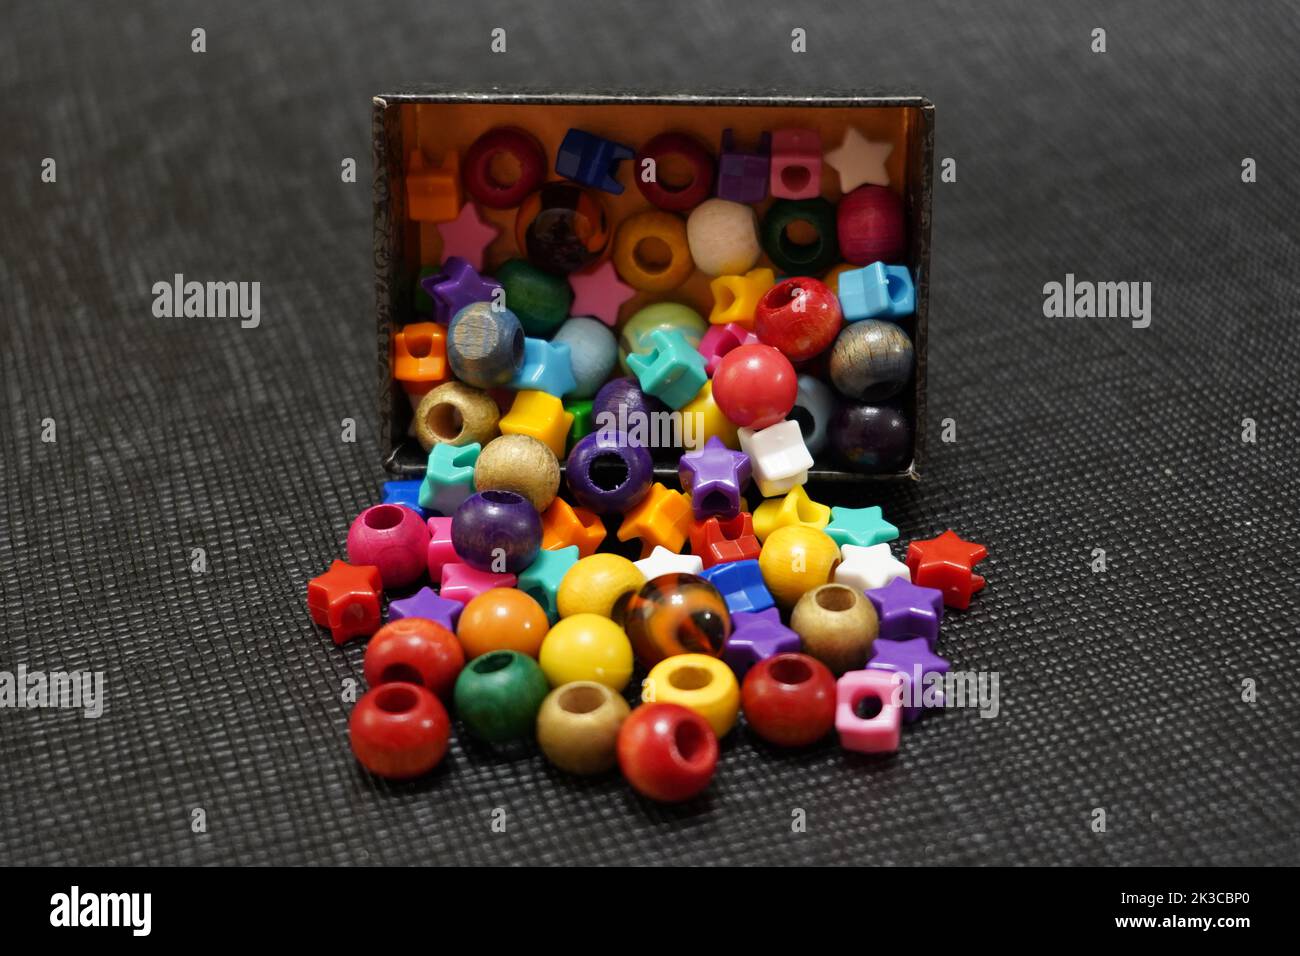 Close-up shot of colorful necklace pieces falling from a cardboard box in front of black background Stock Photo